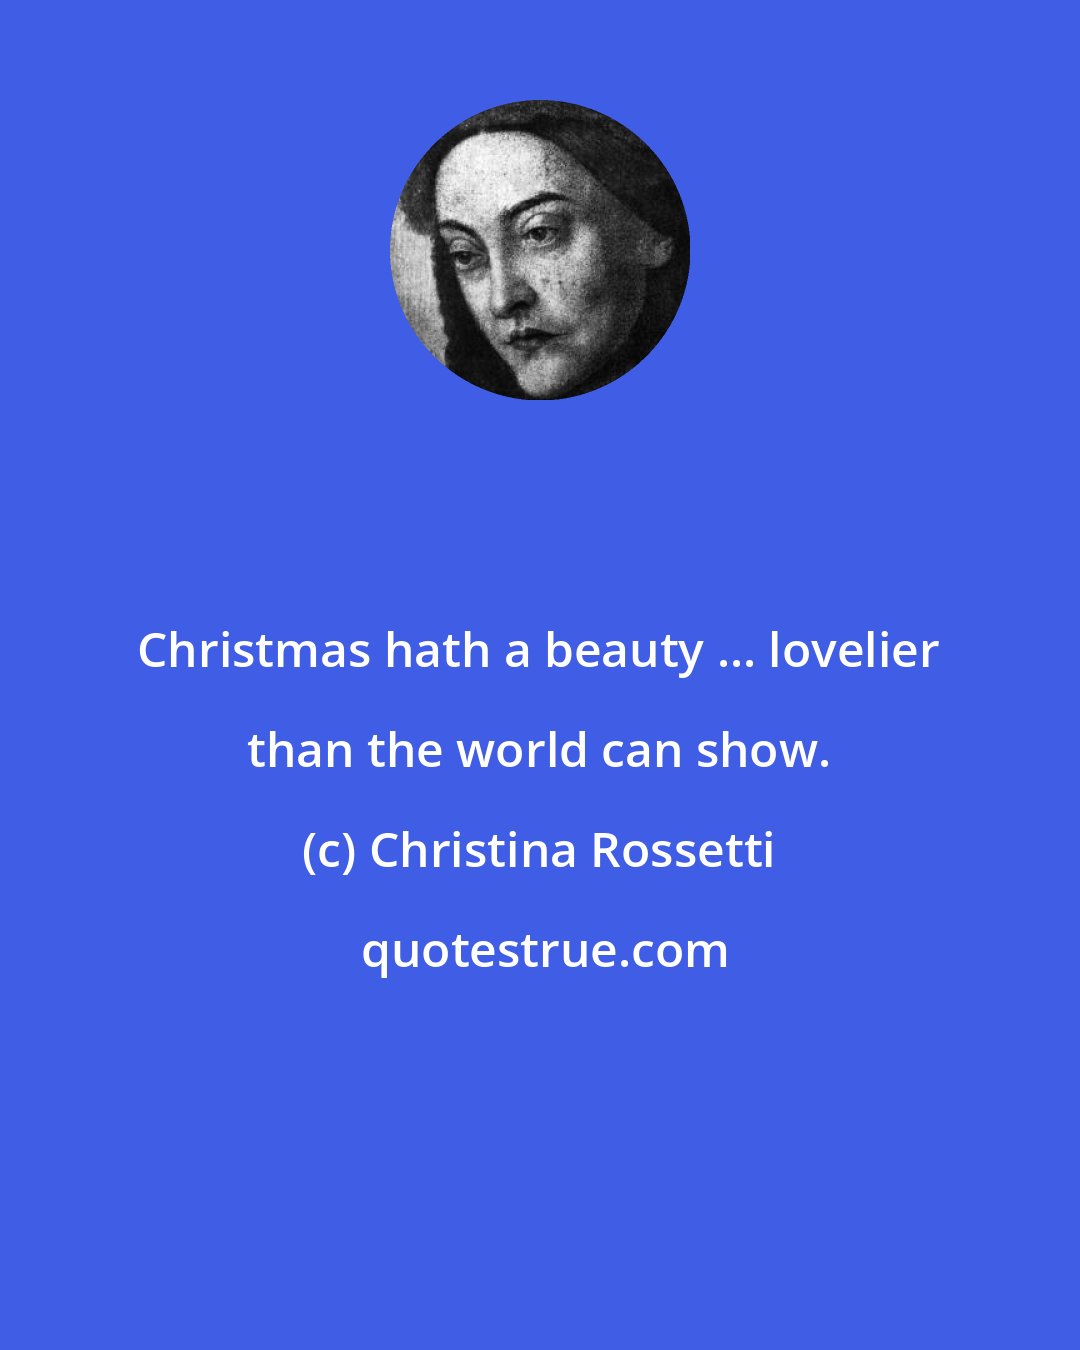 Christina Rossetti: Christmas hath a beauty ... lovelier than the world can show.